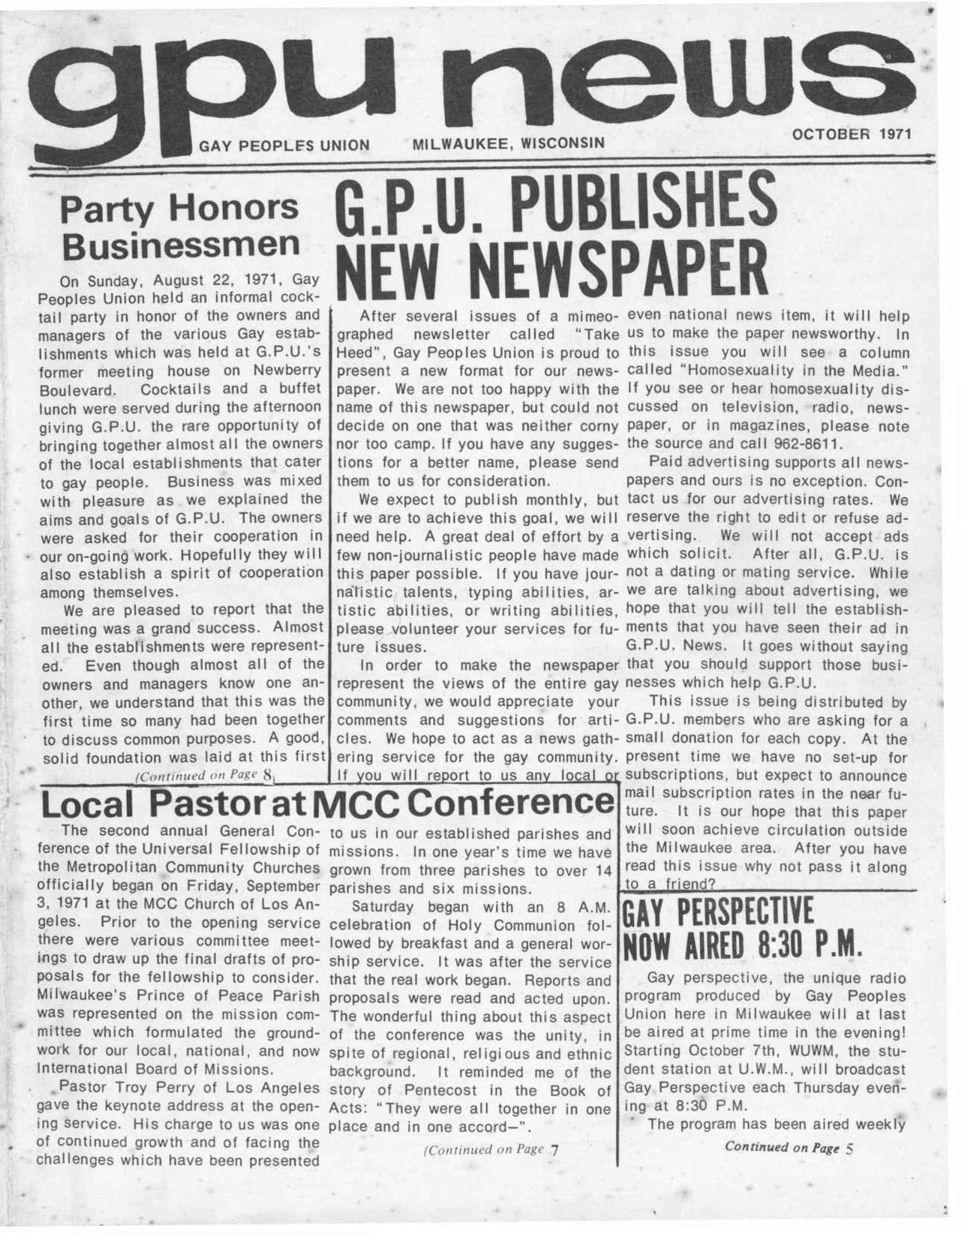 First issue of gpu news- October 1971